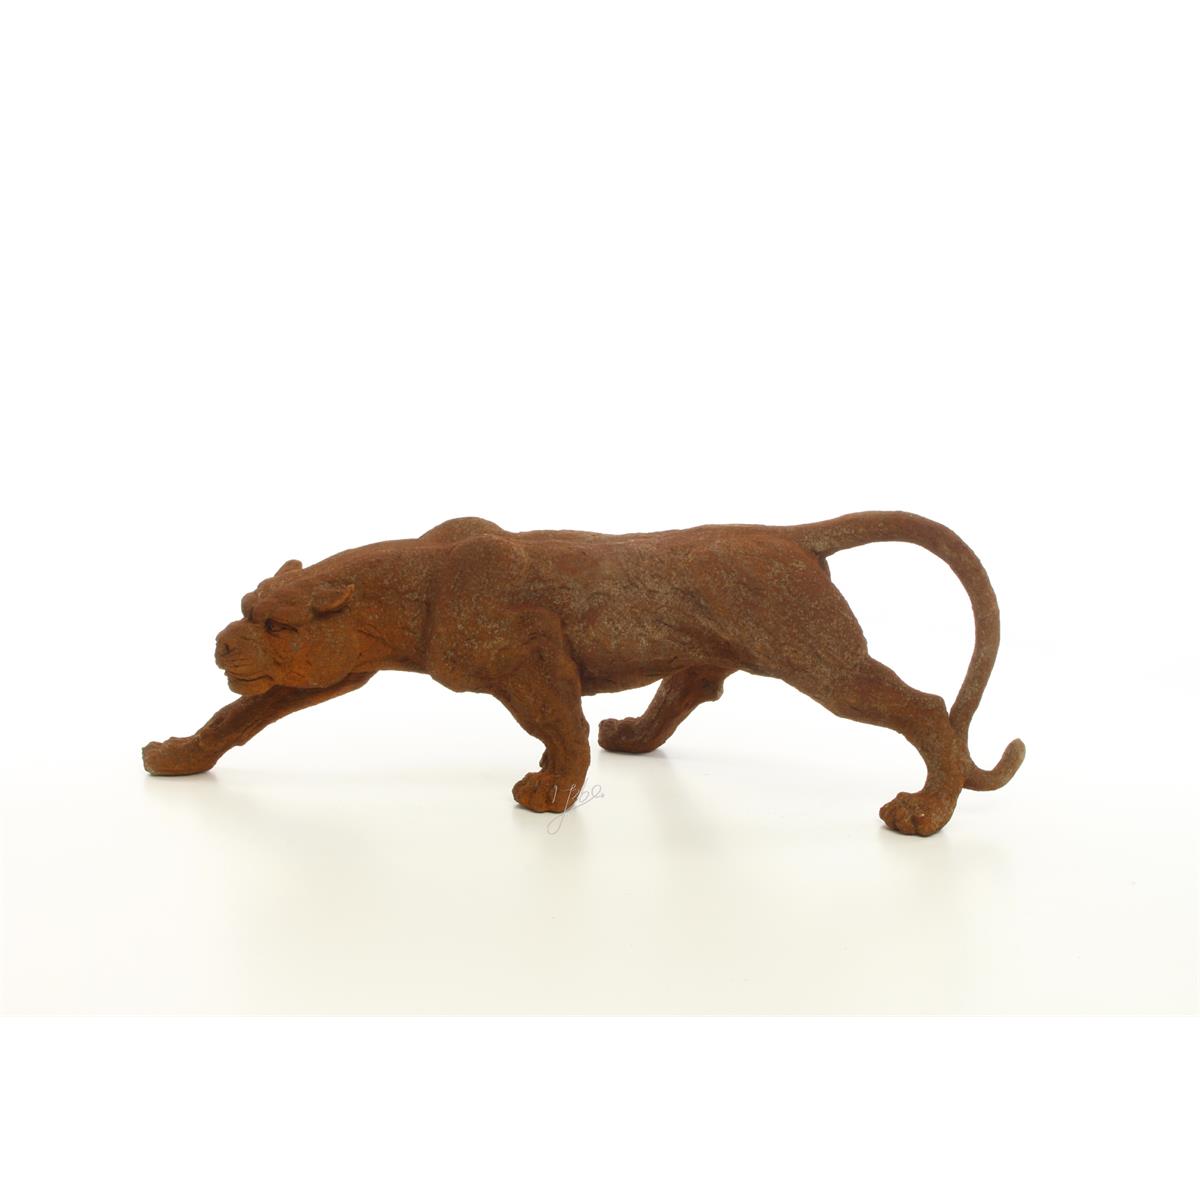 A RESIN FIGURE OF A PANTHER